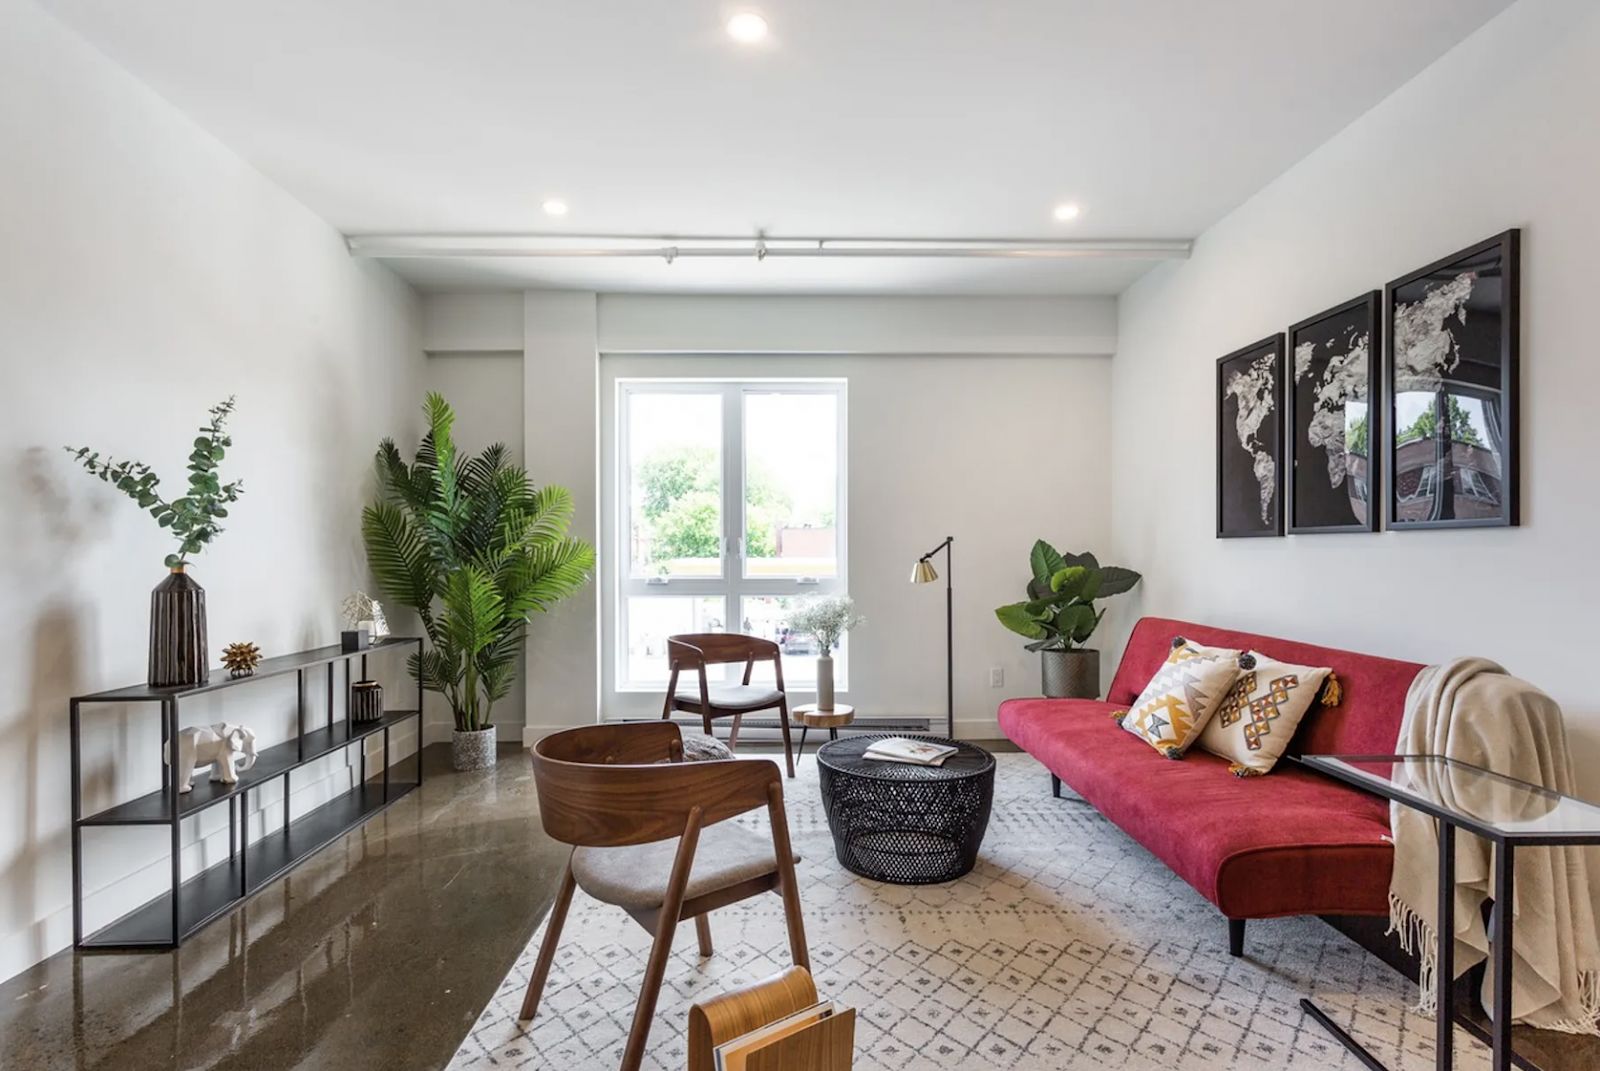 27 Dog friendly apartments for rent montreal ideas